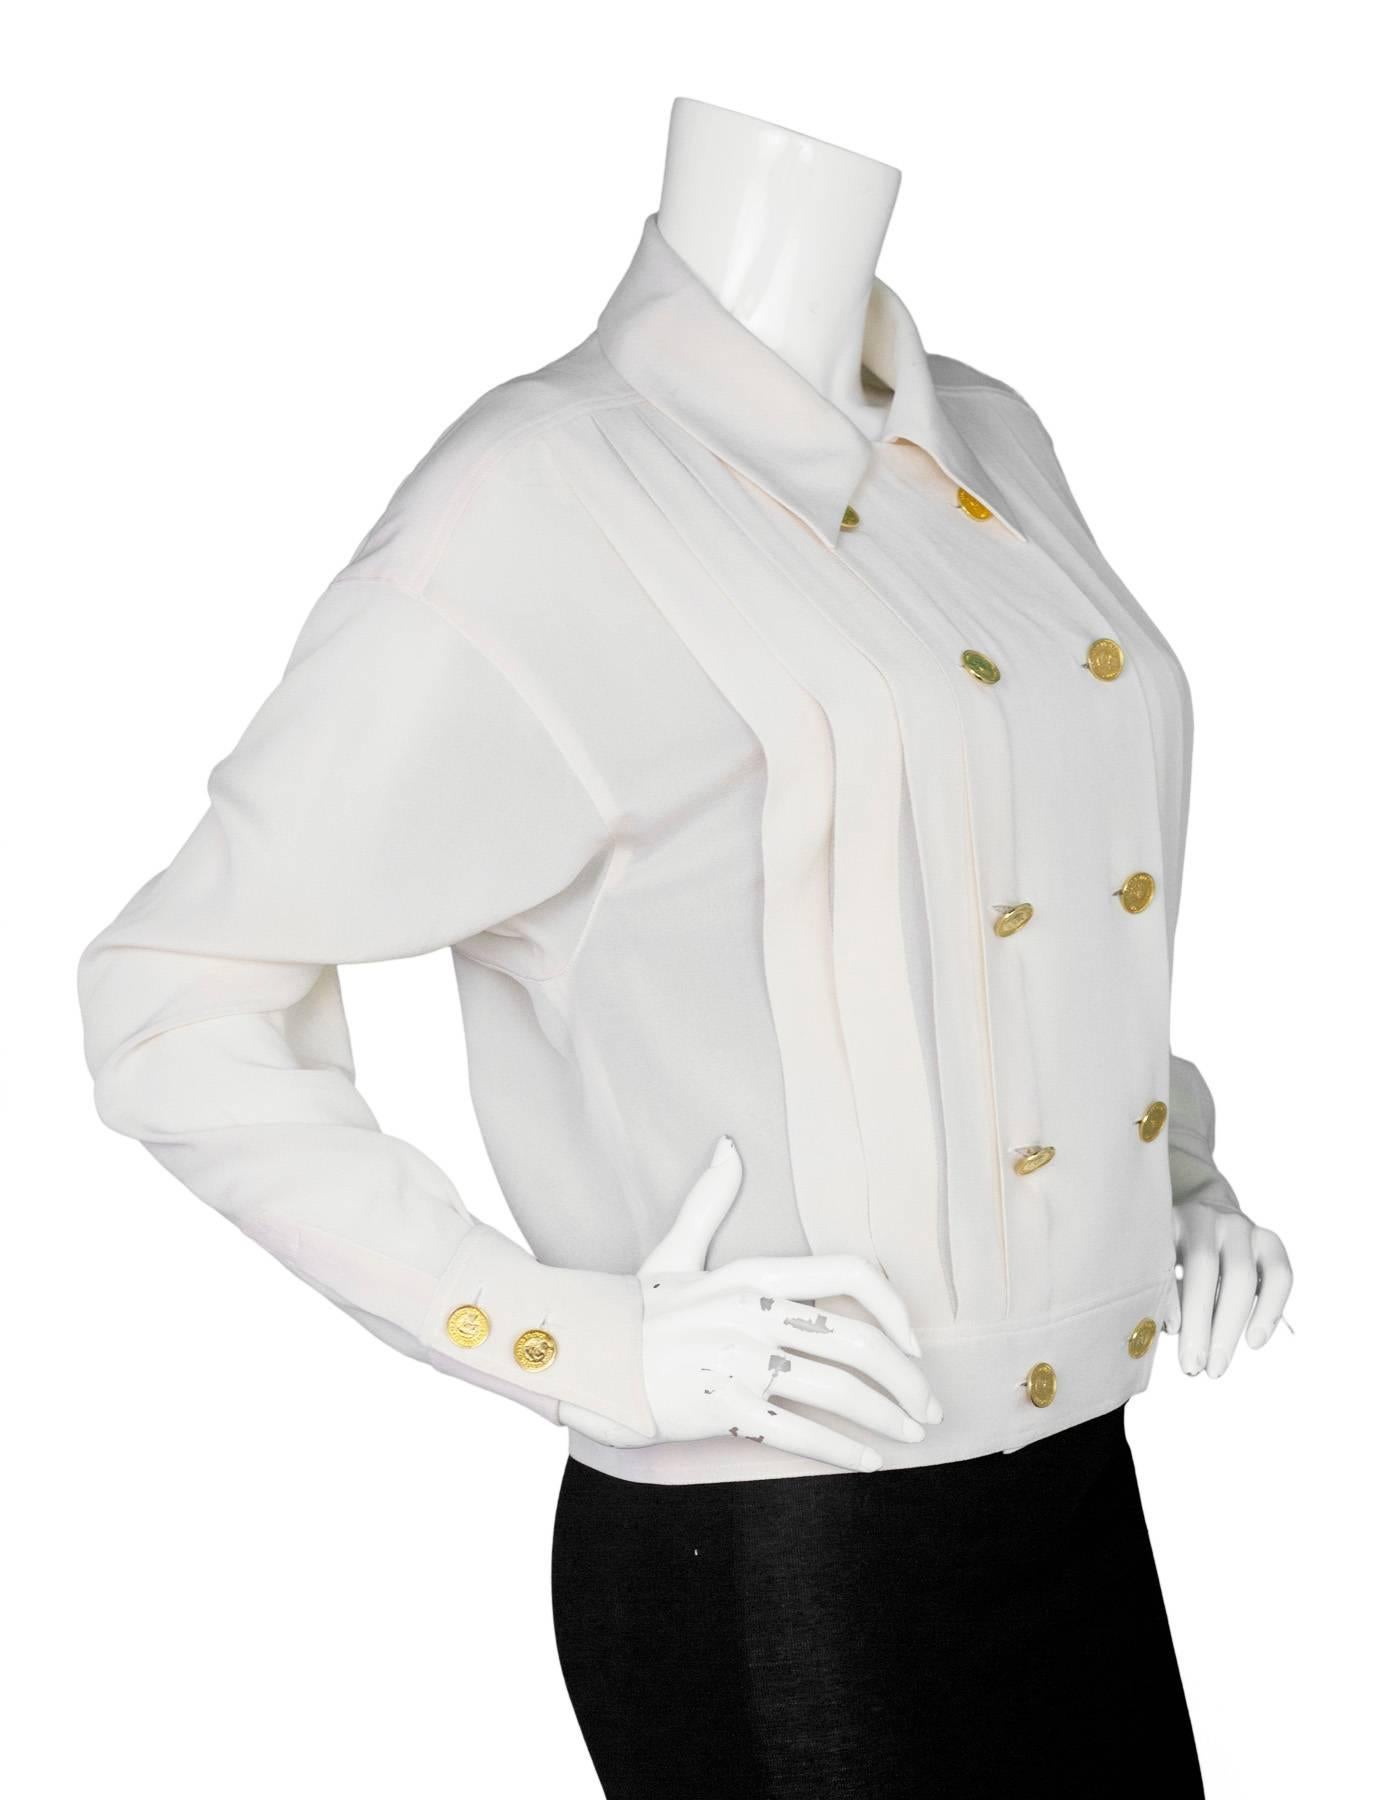 Chanel Vintage Cream Silk Double Breasted Blouse 
Features pleats and gold detailed buttons throughout

Color: Cream
Composition: Not given- believed to be 100% silk
Lining: None
Closure/Opening: Double breasted button down closure
Exterior Pockets: